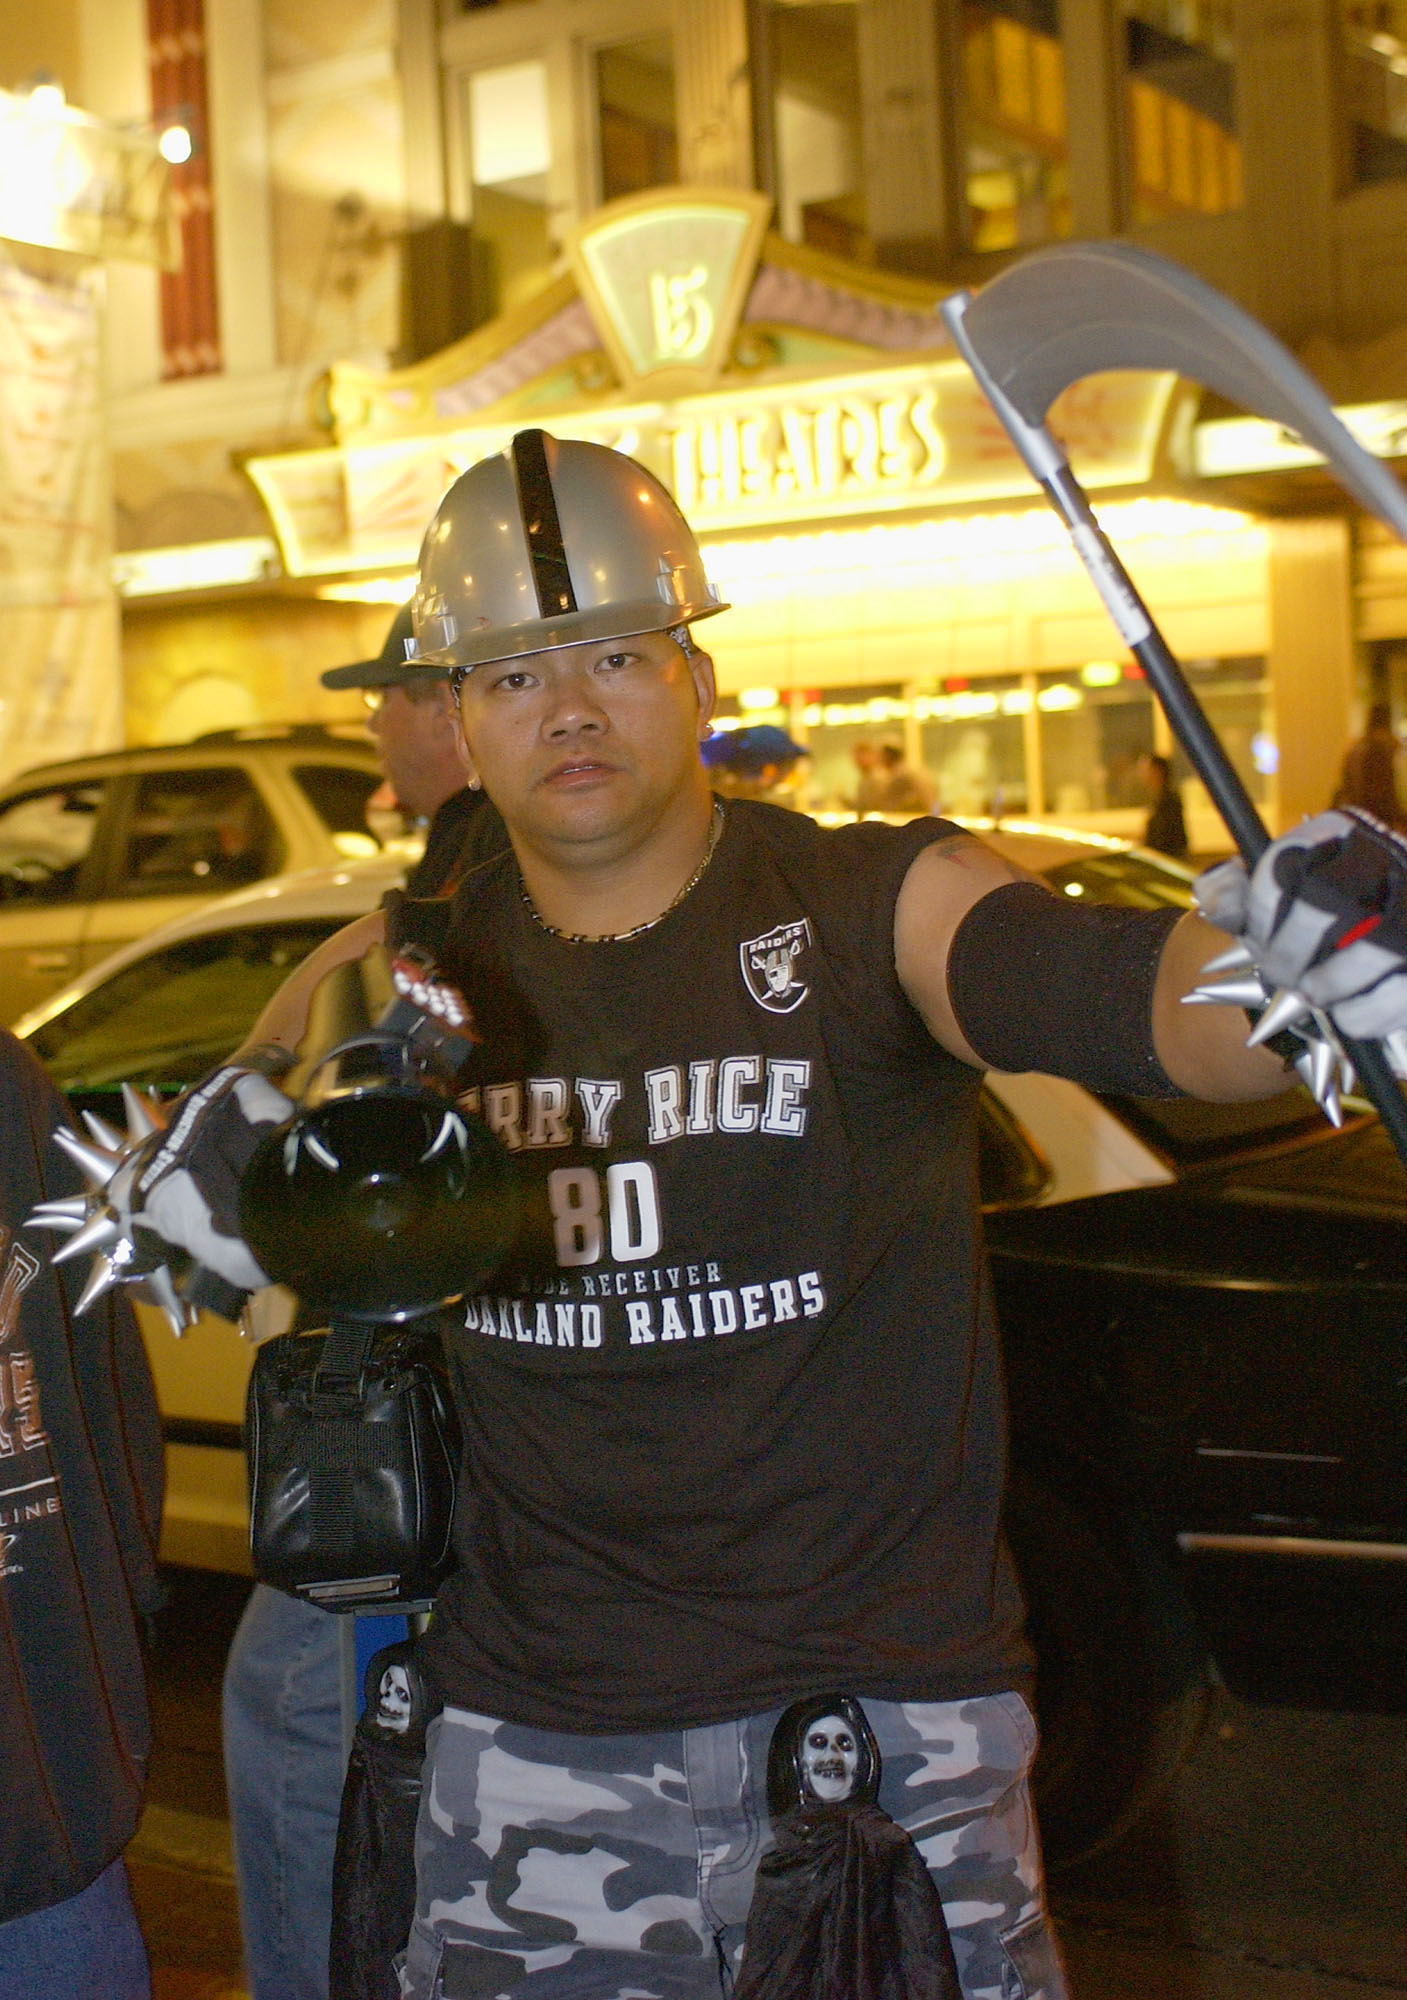 SAN DIEGO - JANUARY 24:  A Raider fan gets decked out in full gear in the Gaslamp District on January 24, 2003 in San Diego, California.  San Diego hosts Super Bowl XXXVII on Sunday January 26, 2003.  (Photo by Ezra Shaw/Getty Images)